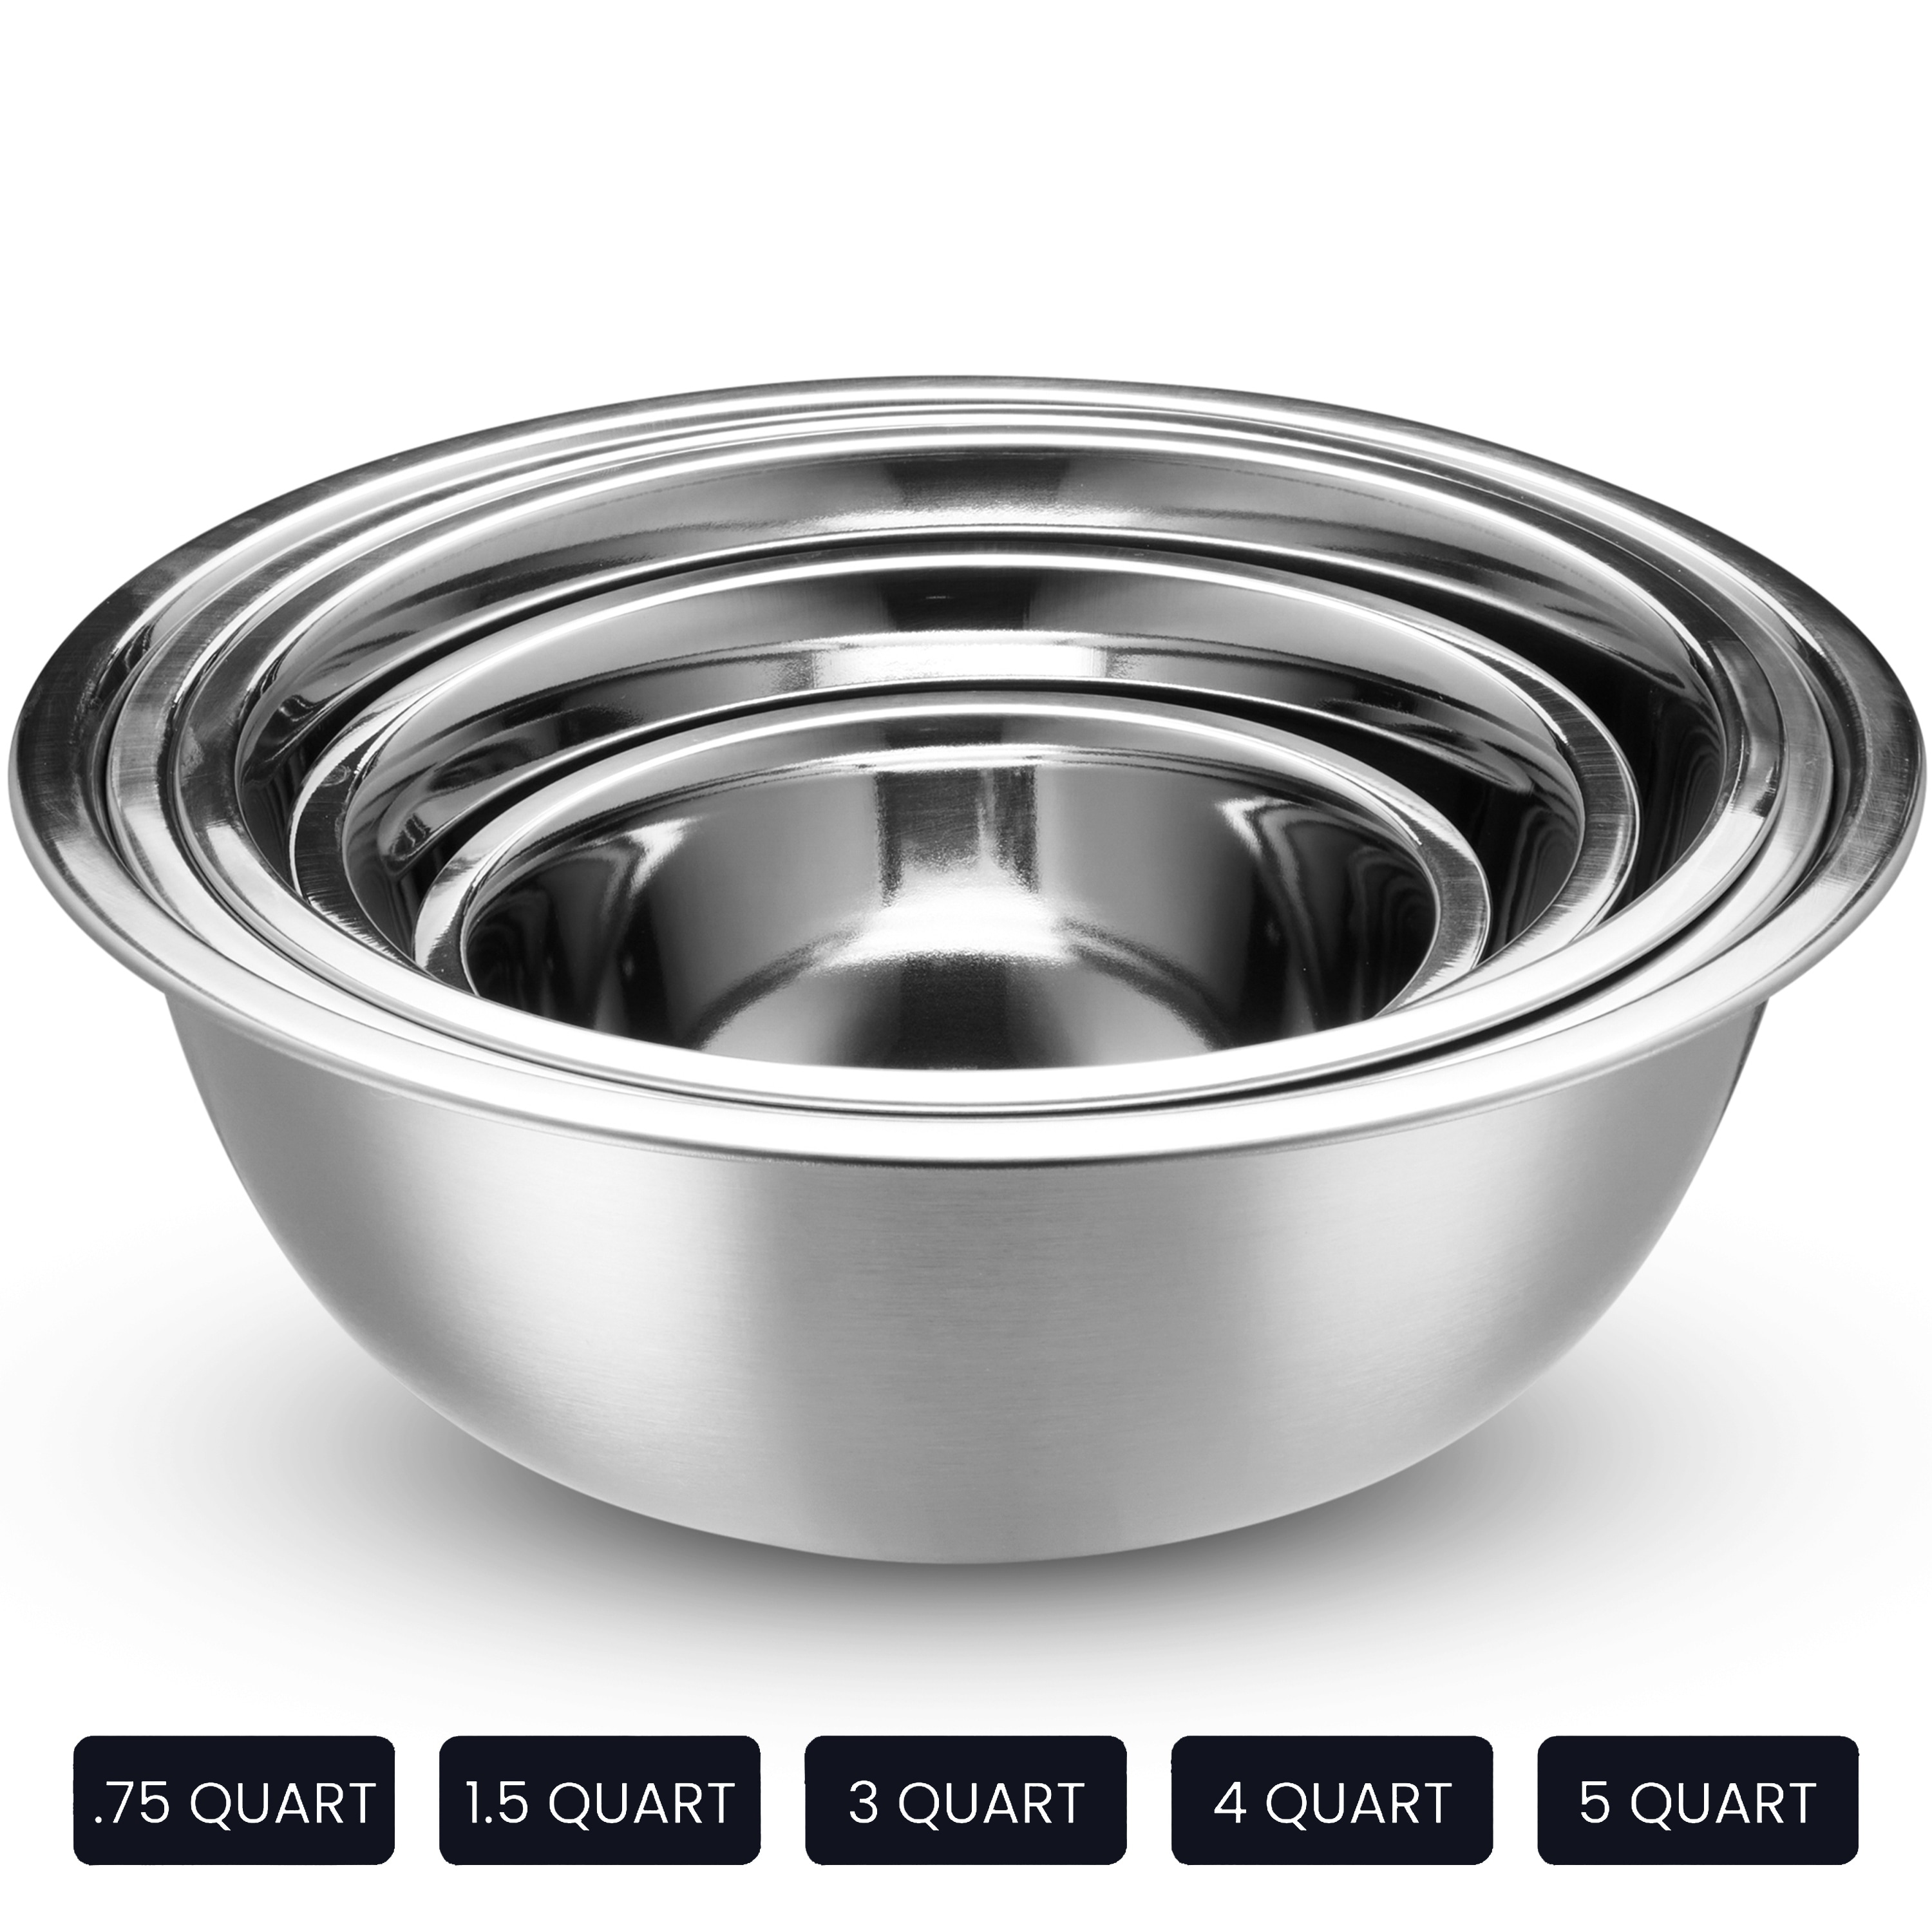 Cuisinart Set of 3 Stainless Steel Mixing Bowls w/o Lids - Bed Bath &  Beyond - 21143937